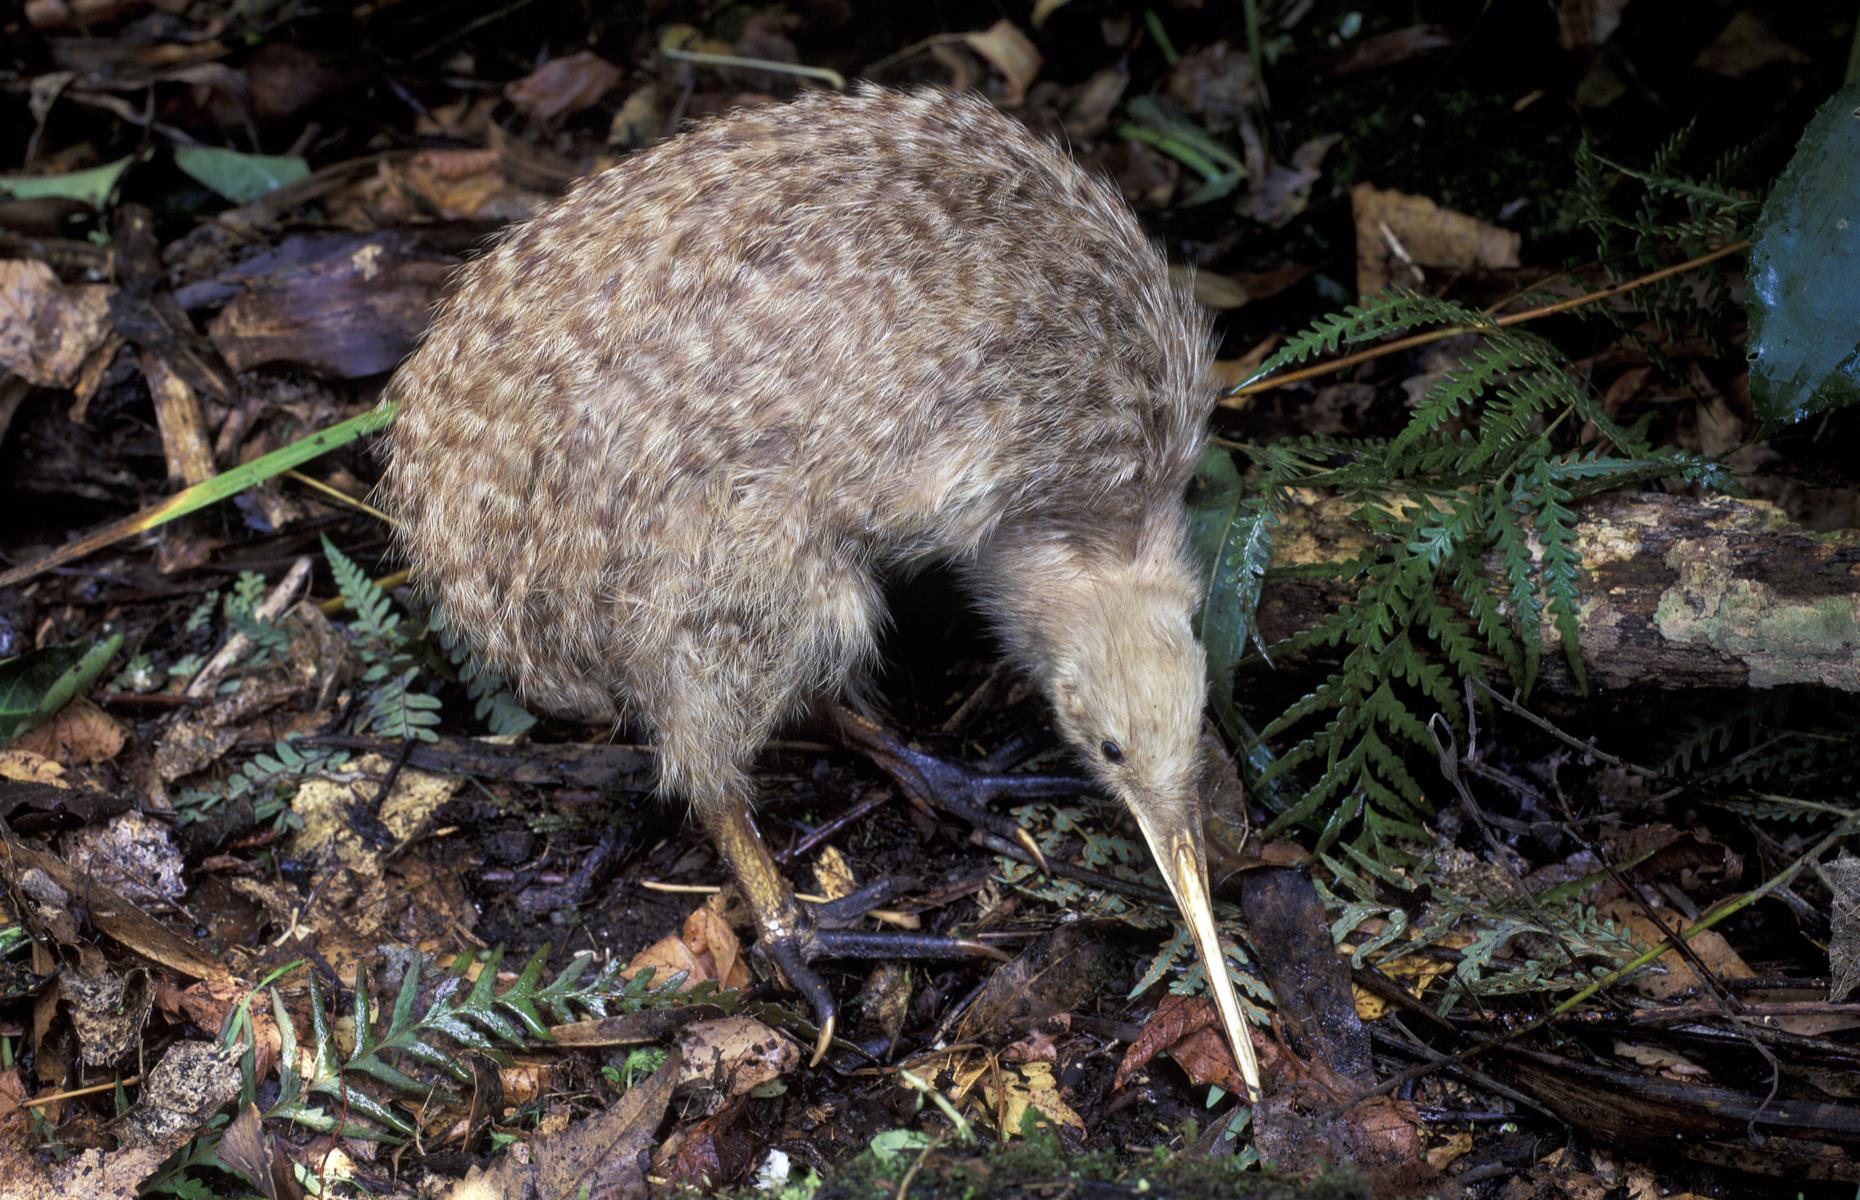 You might hear the distinctive call of kiwis at night, but spotting the flightless bird by chance is highly unlikely as they are generally nocturnal and also an endangered species. Outside of wildlife sanctuaries and bird parks, you might get the opportunity to see one in the wild on Stewart Island, or Rakiura in Māori.